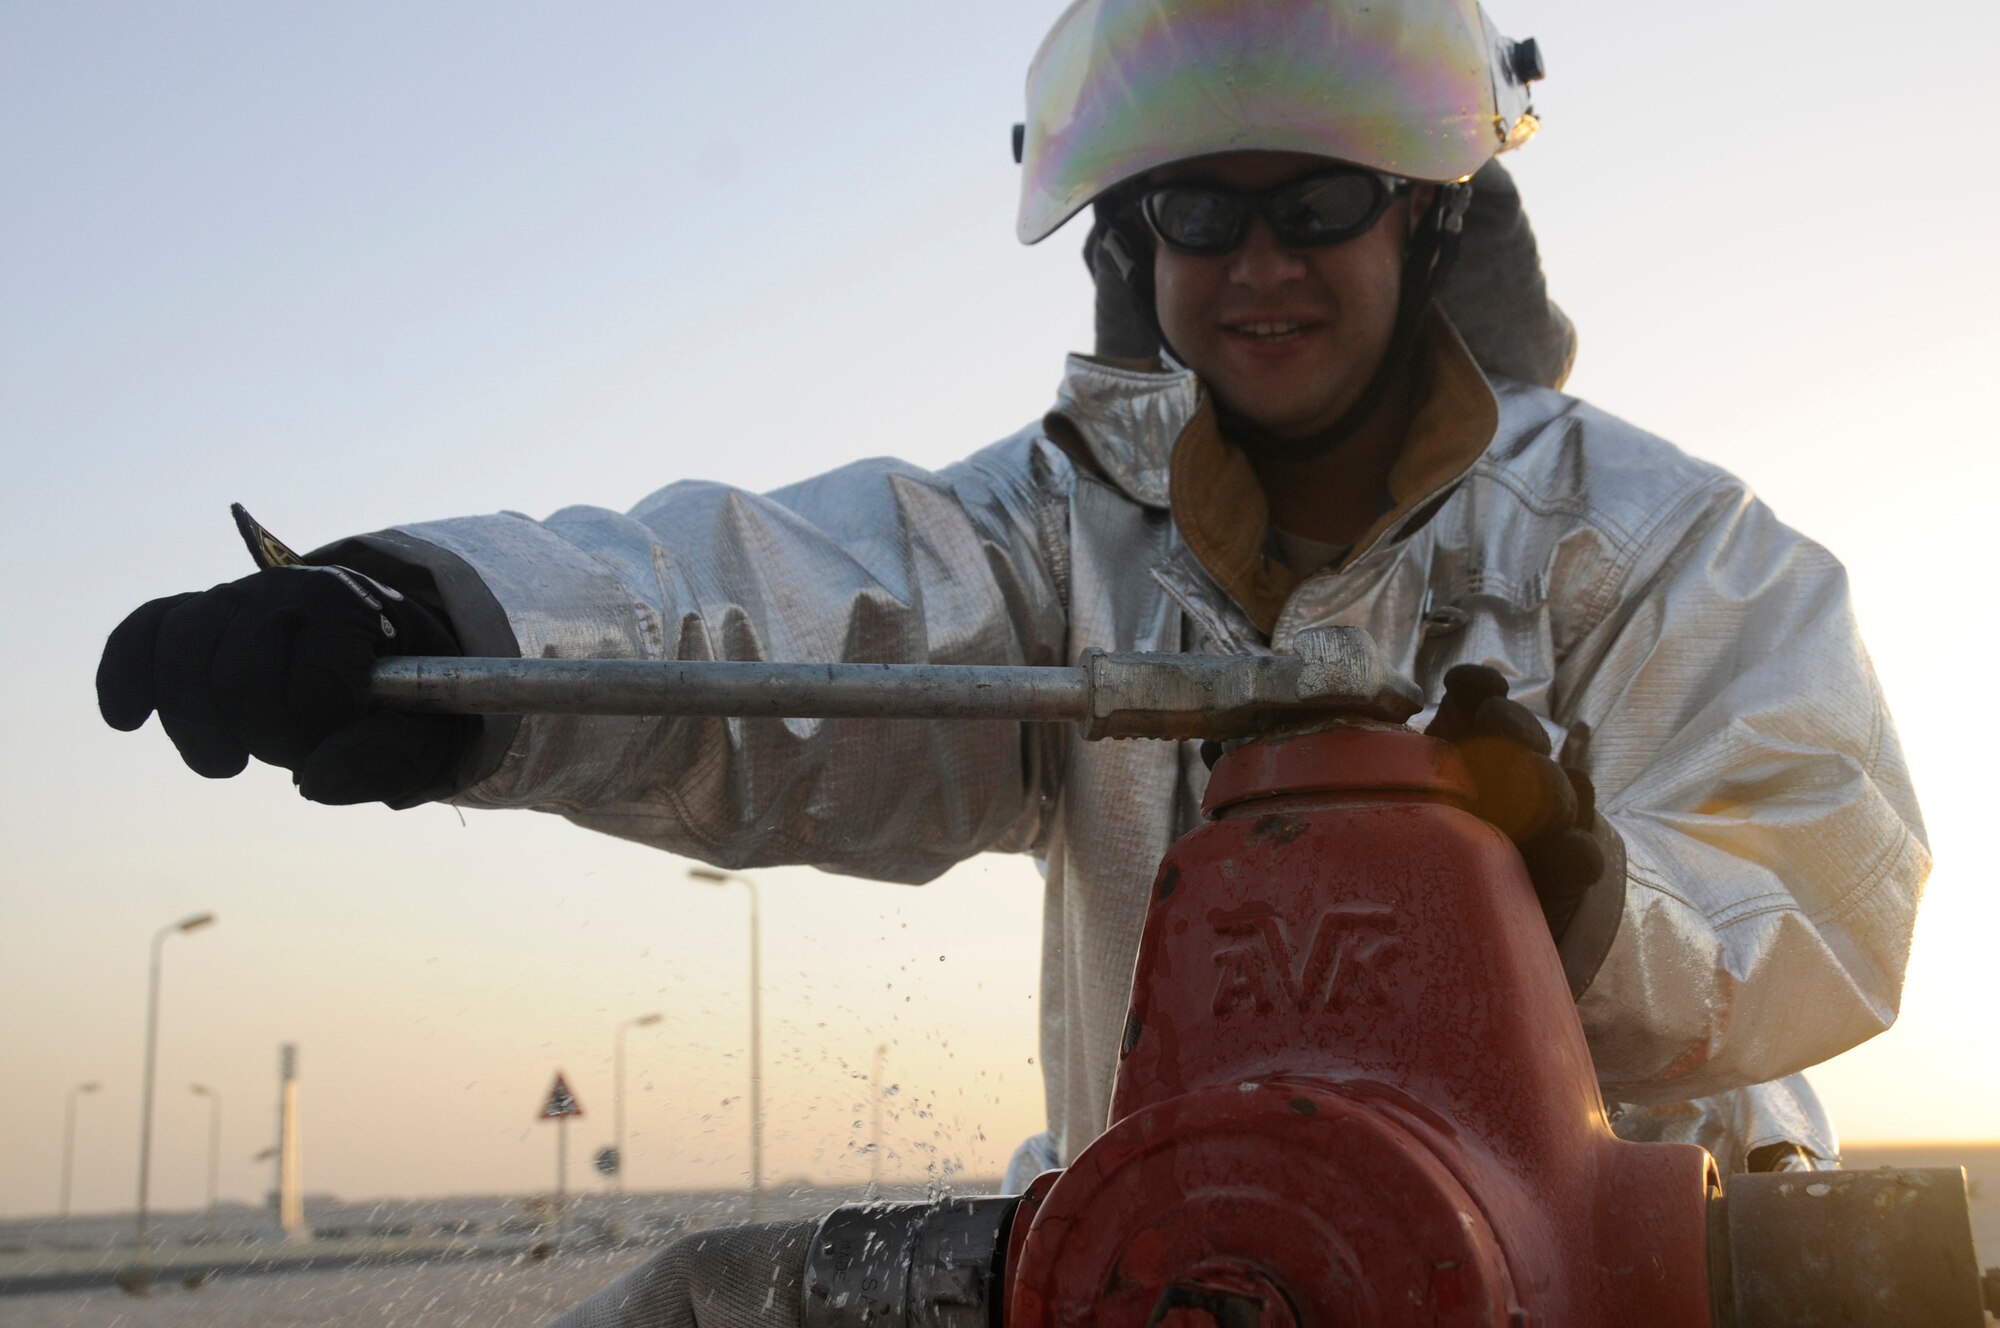 Staff Sgt. Anthony Altomare, fire emergency services crew chief assigned to the 379th Expeditionary Civil Engineer Squadron, uses a hydro wrench to reservice a P-19 crash truck Oct. 20, 2008, at an undisclosed air base in Southwest Asia.  Sergeant Altomare, a native of Lisbon, Ohio, is deployed from Tyndall Air Force Base, Fla., in support of Operations Iraqi and Enduring Freedom and Joint Task Force-Horn of Africa. (U.S. Air Force photo by Staff Sgt. Darnell T. Cannady/Released)